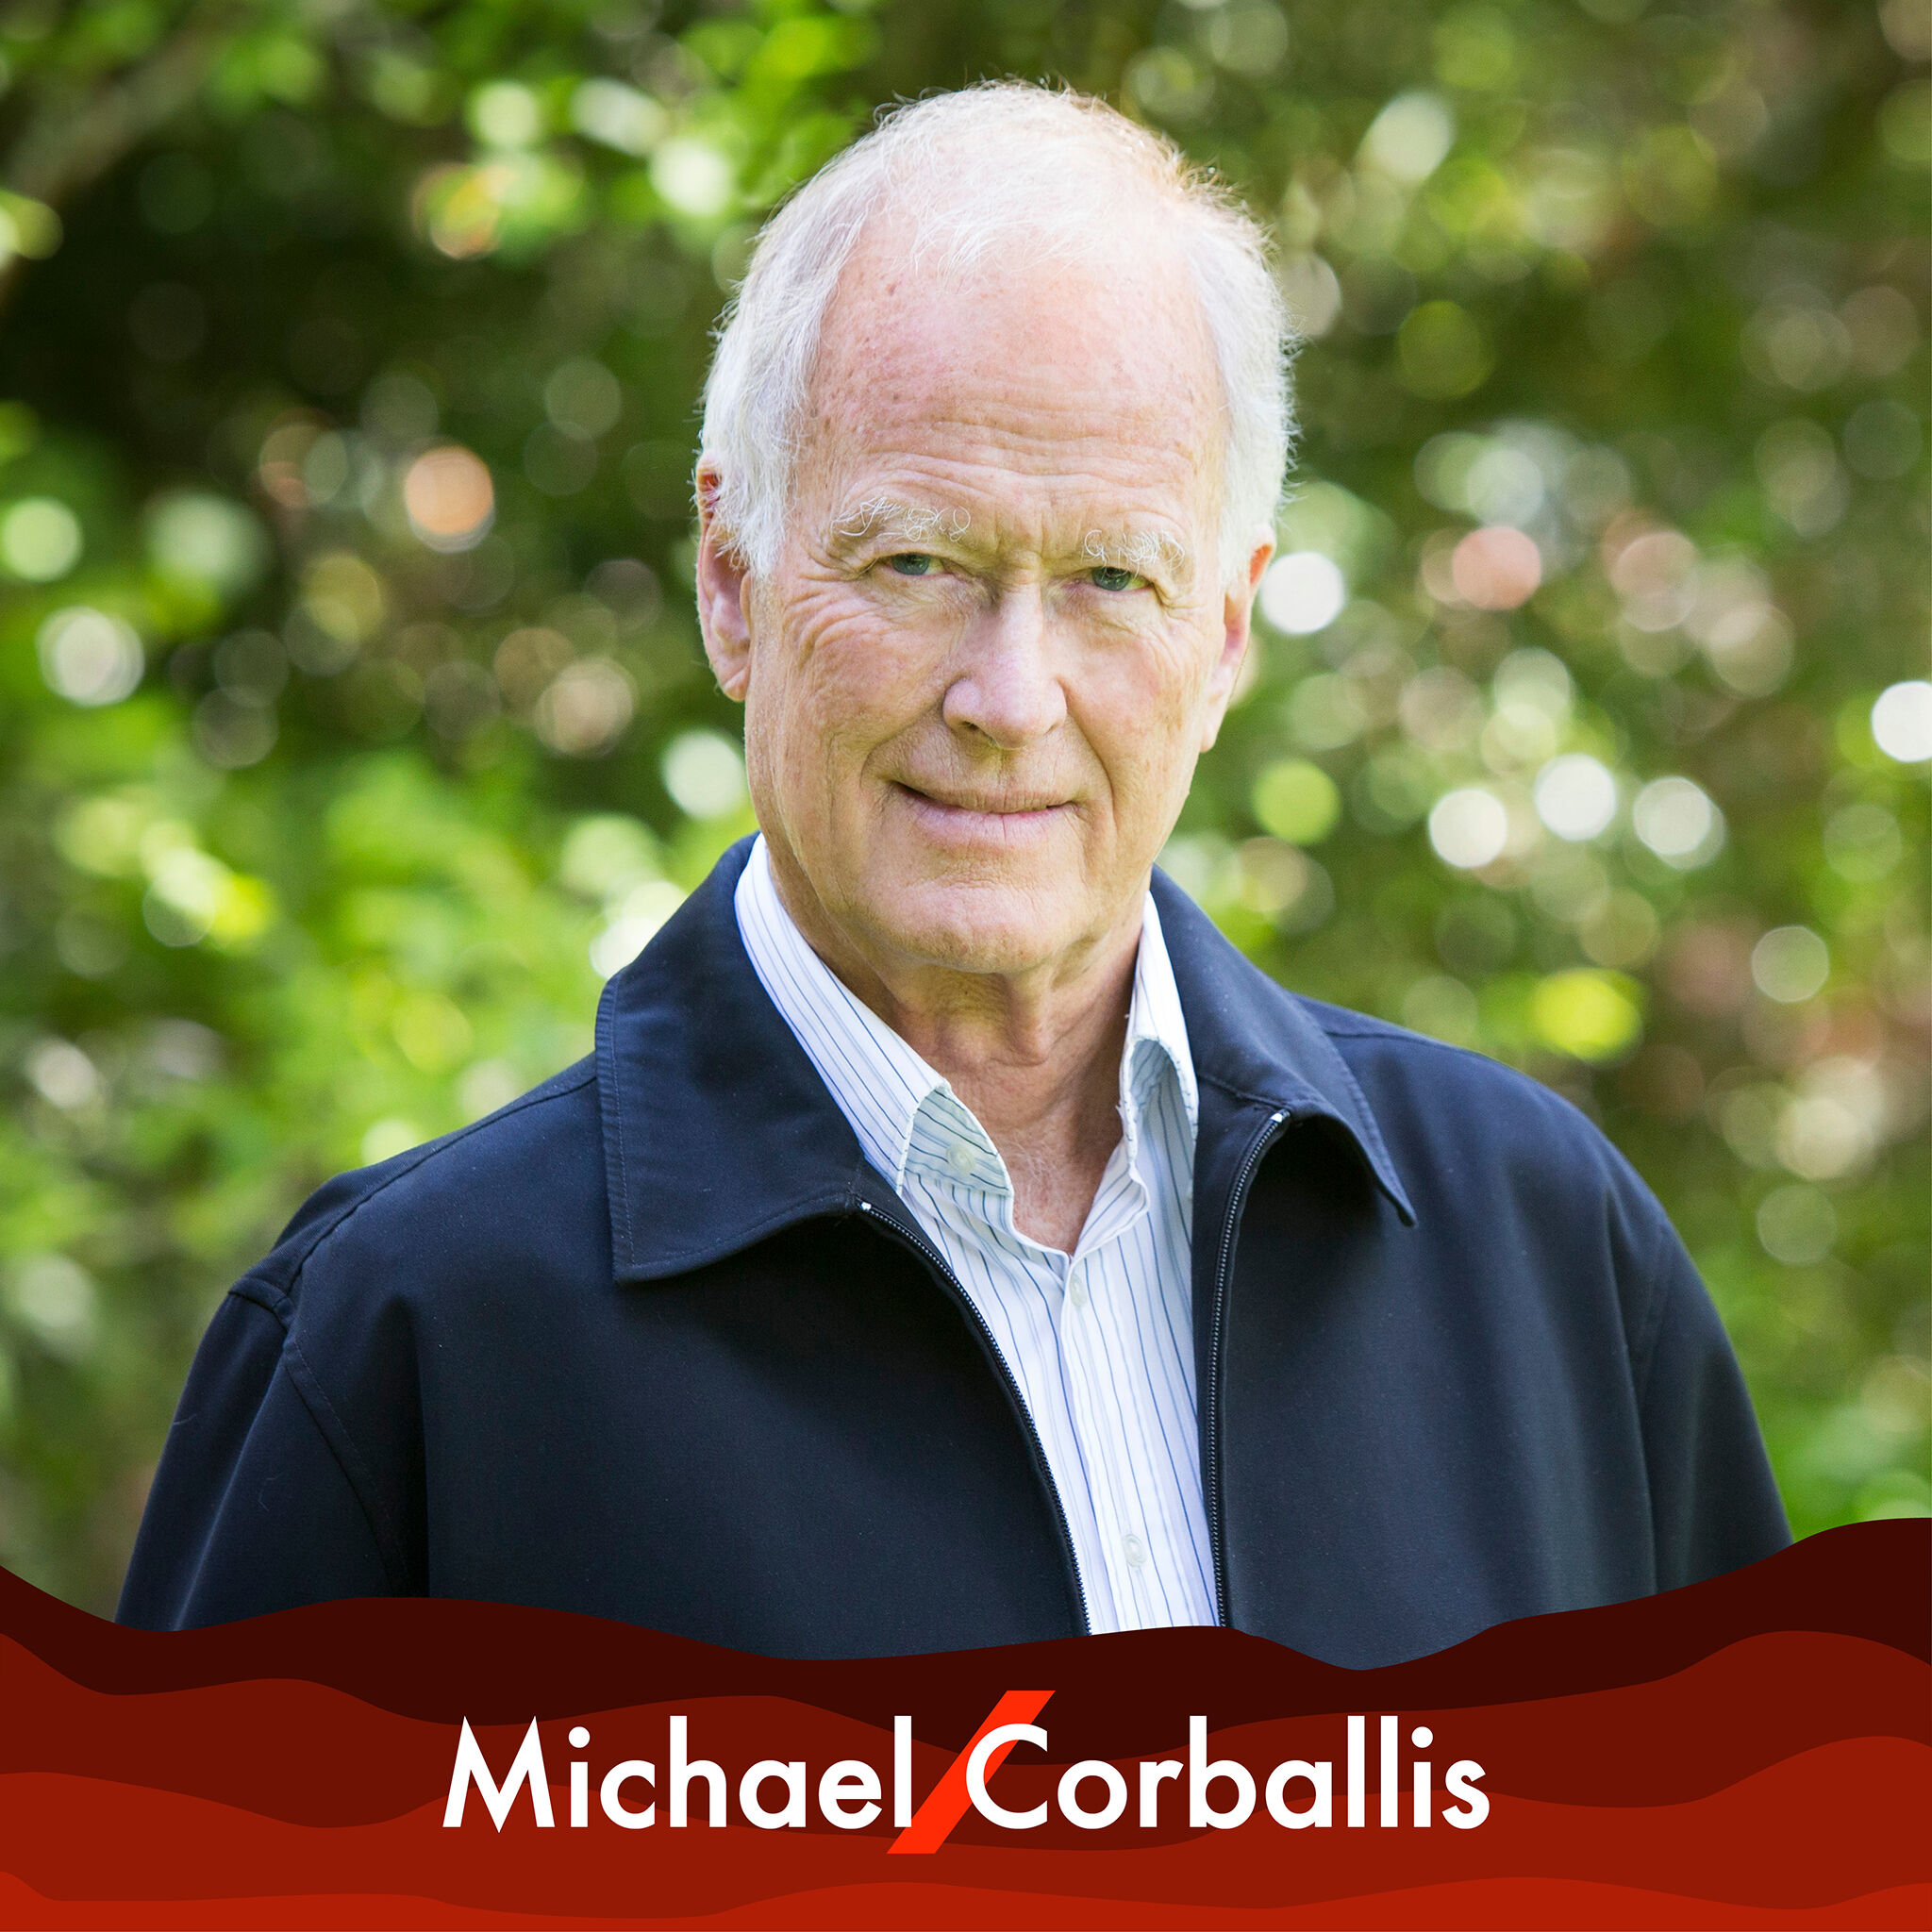 A picture of Michael Corballis